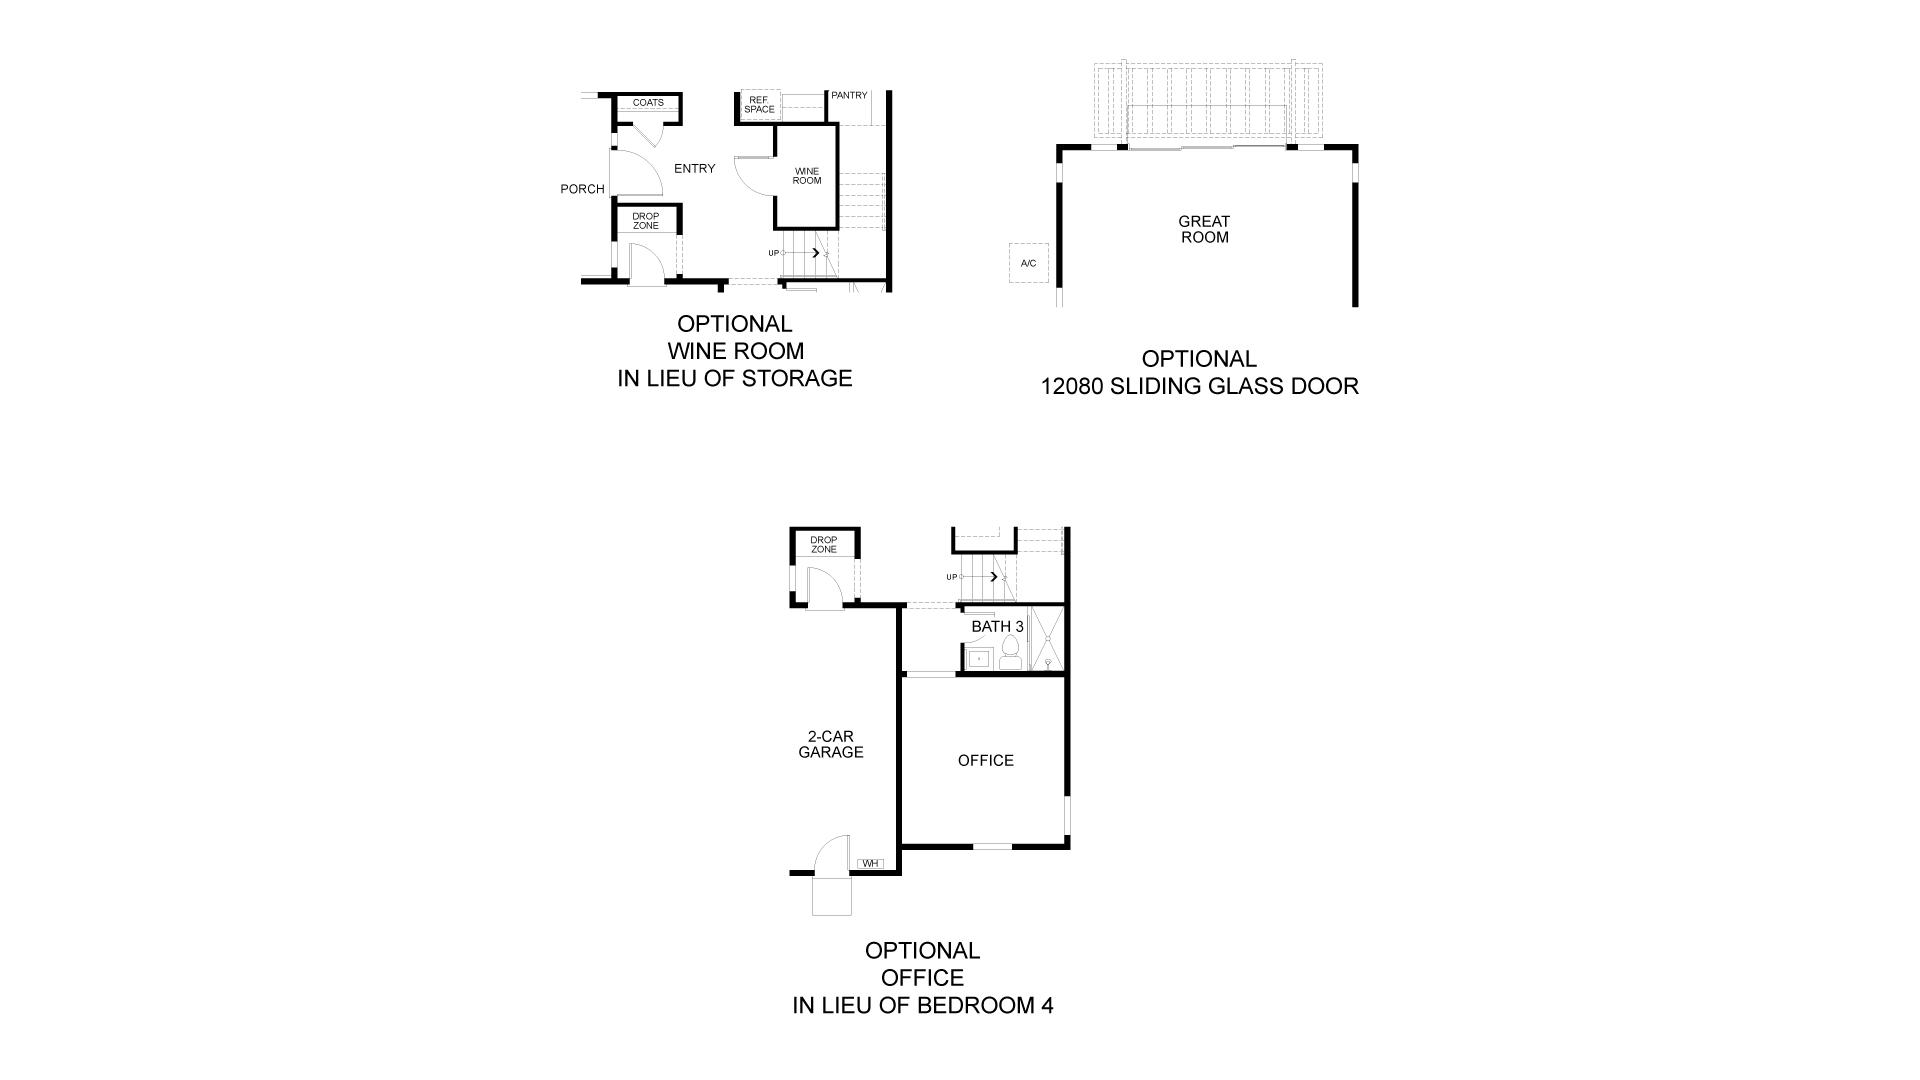 Residence 3 Room Options. 4br New Home in Fairfield, CA